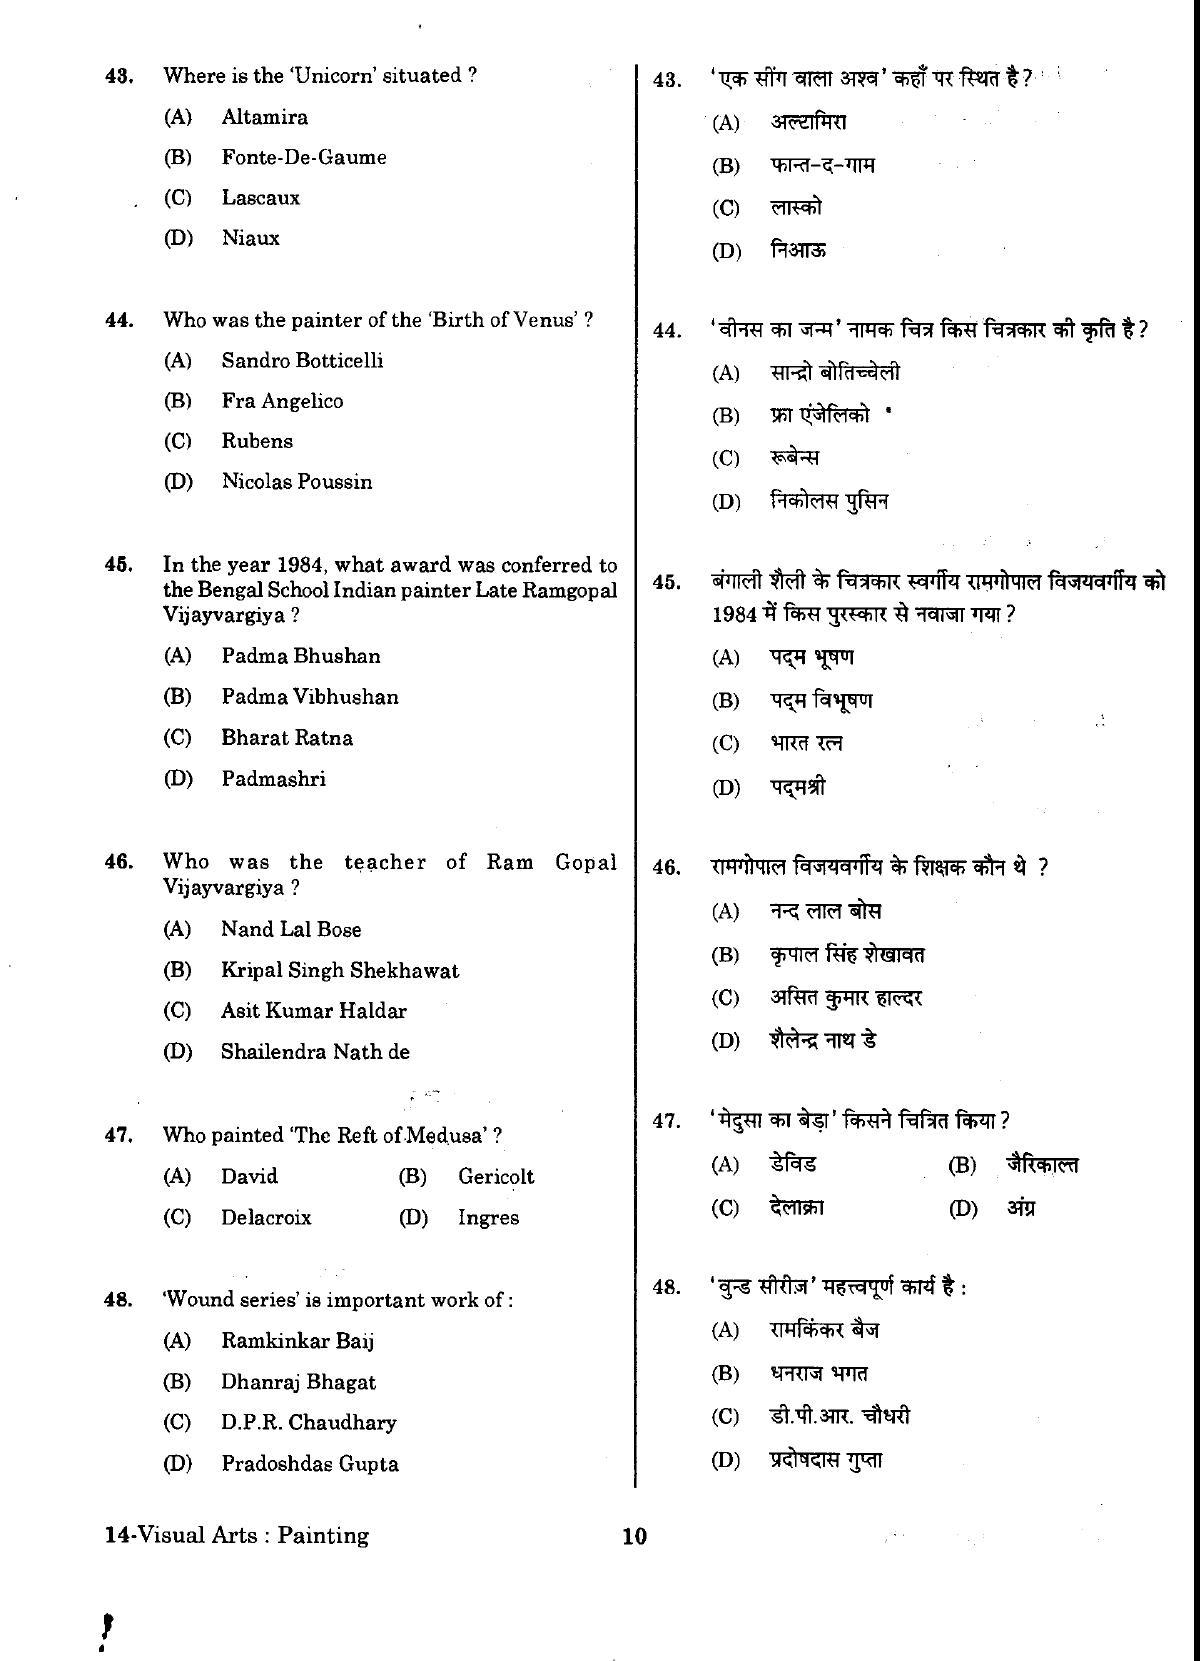 URATPG Visual Arts Painting Sample Question Paper 2018 - Page 9